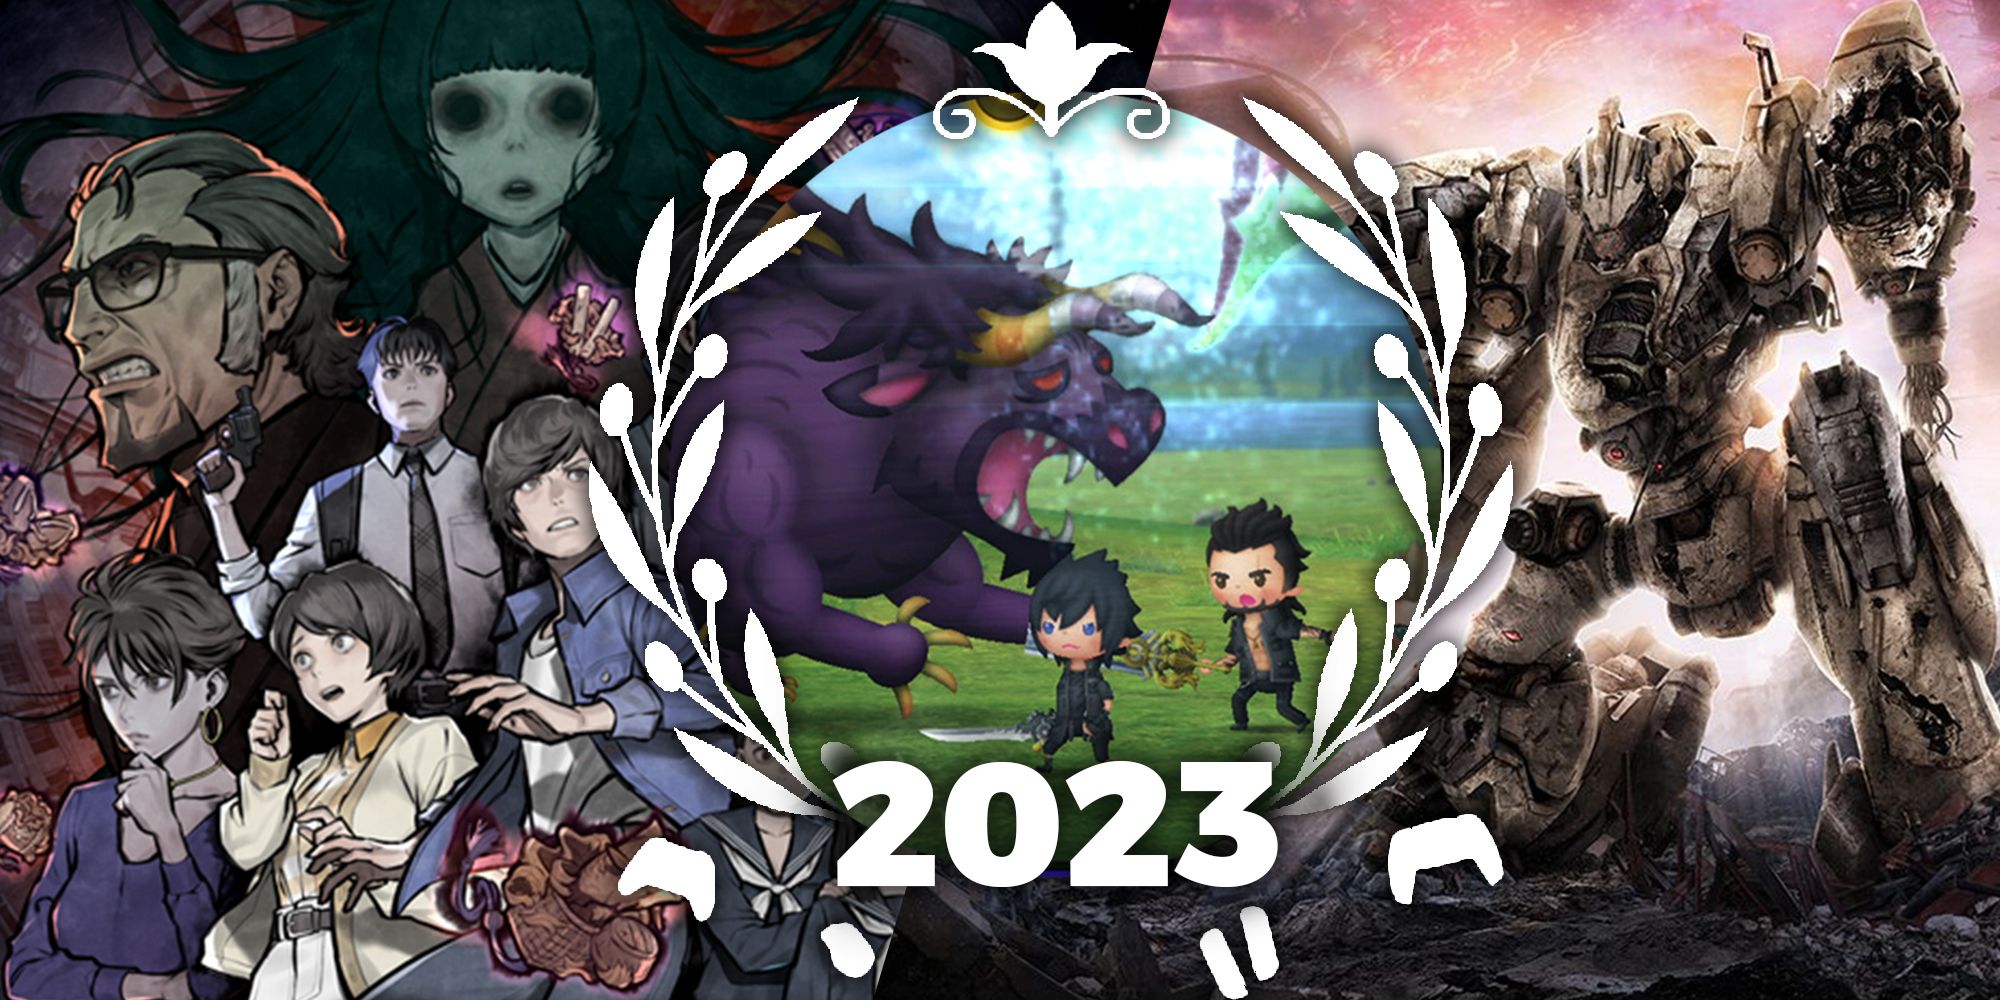 GOTY 2023, Feature-Kennedy, split image featuring Armored Core 6, Theatrhythm, and Paranormasight